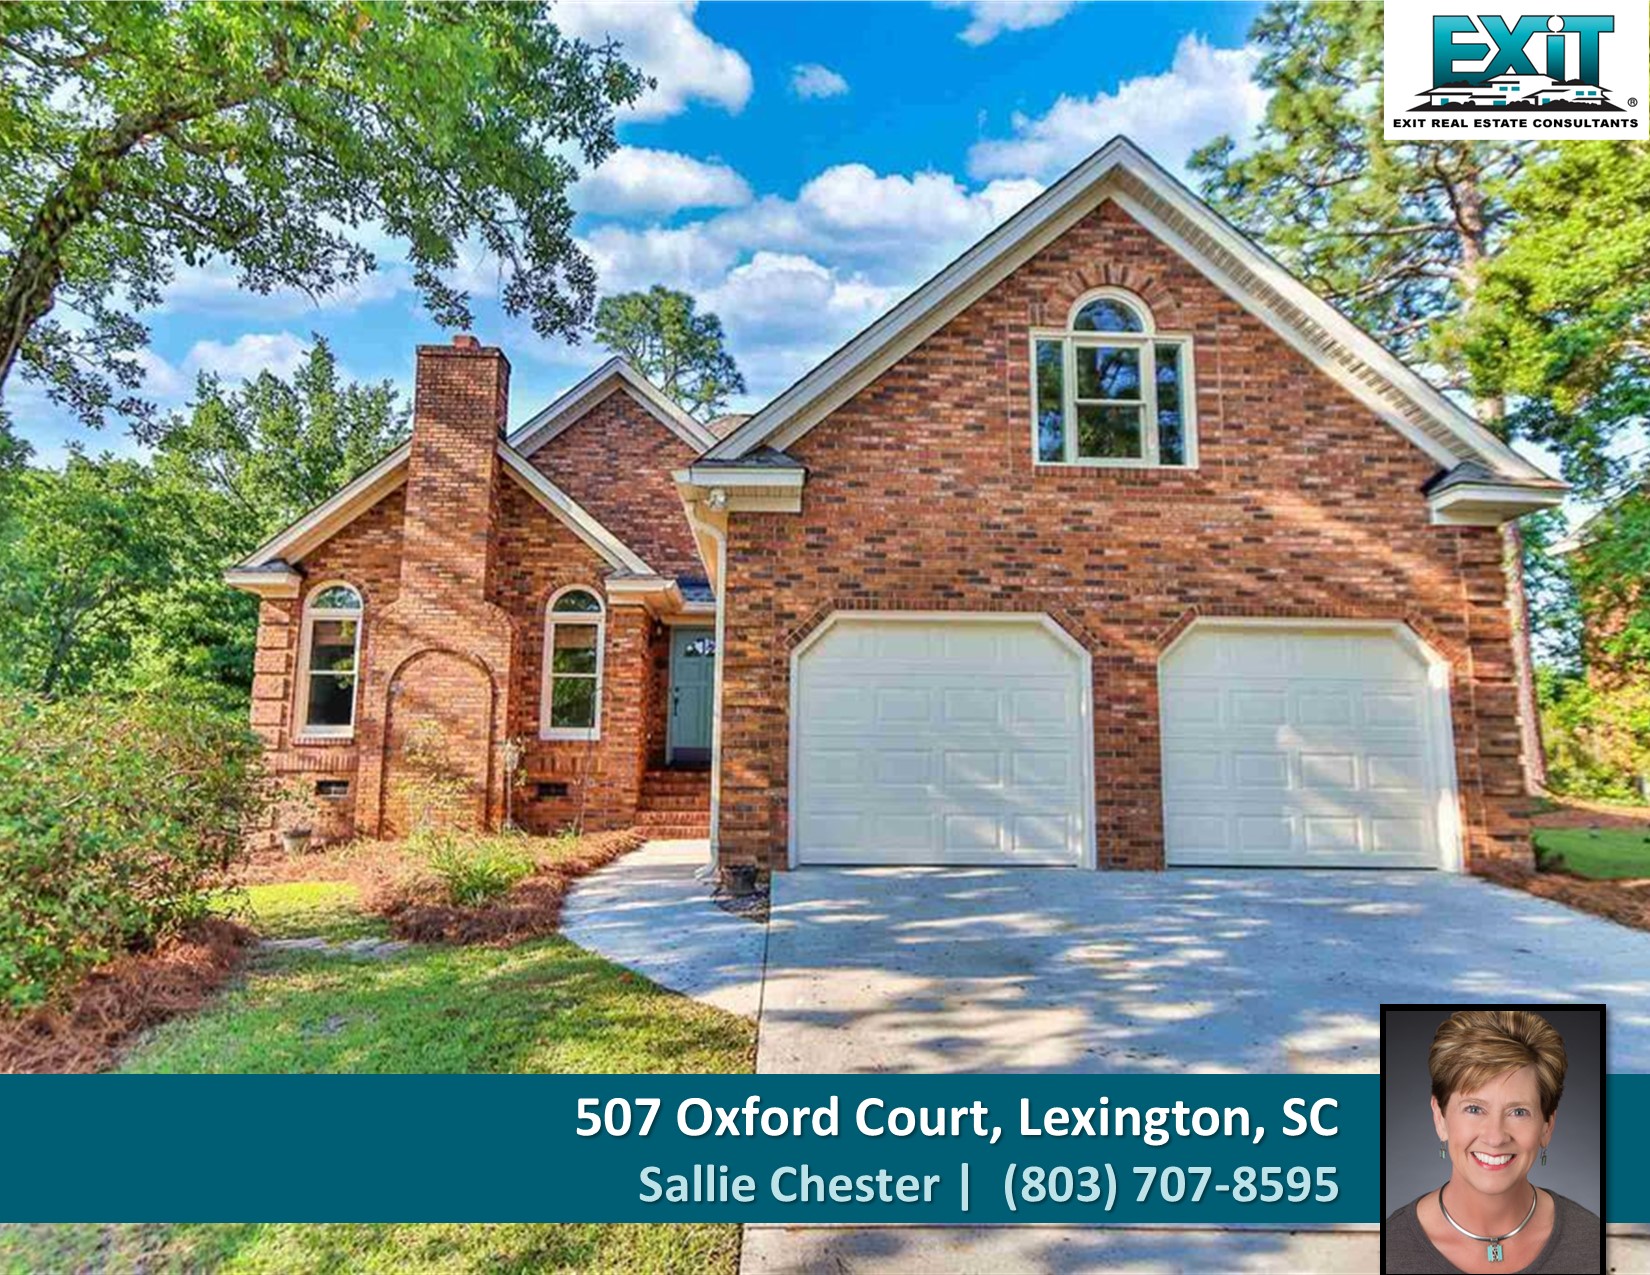 Just listed in Cherokee Lakes